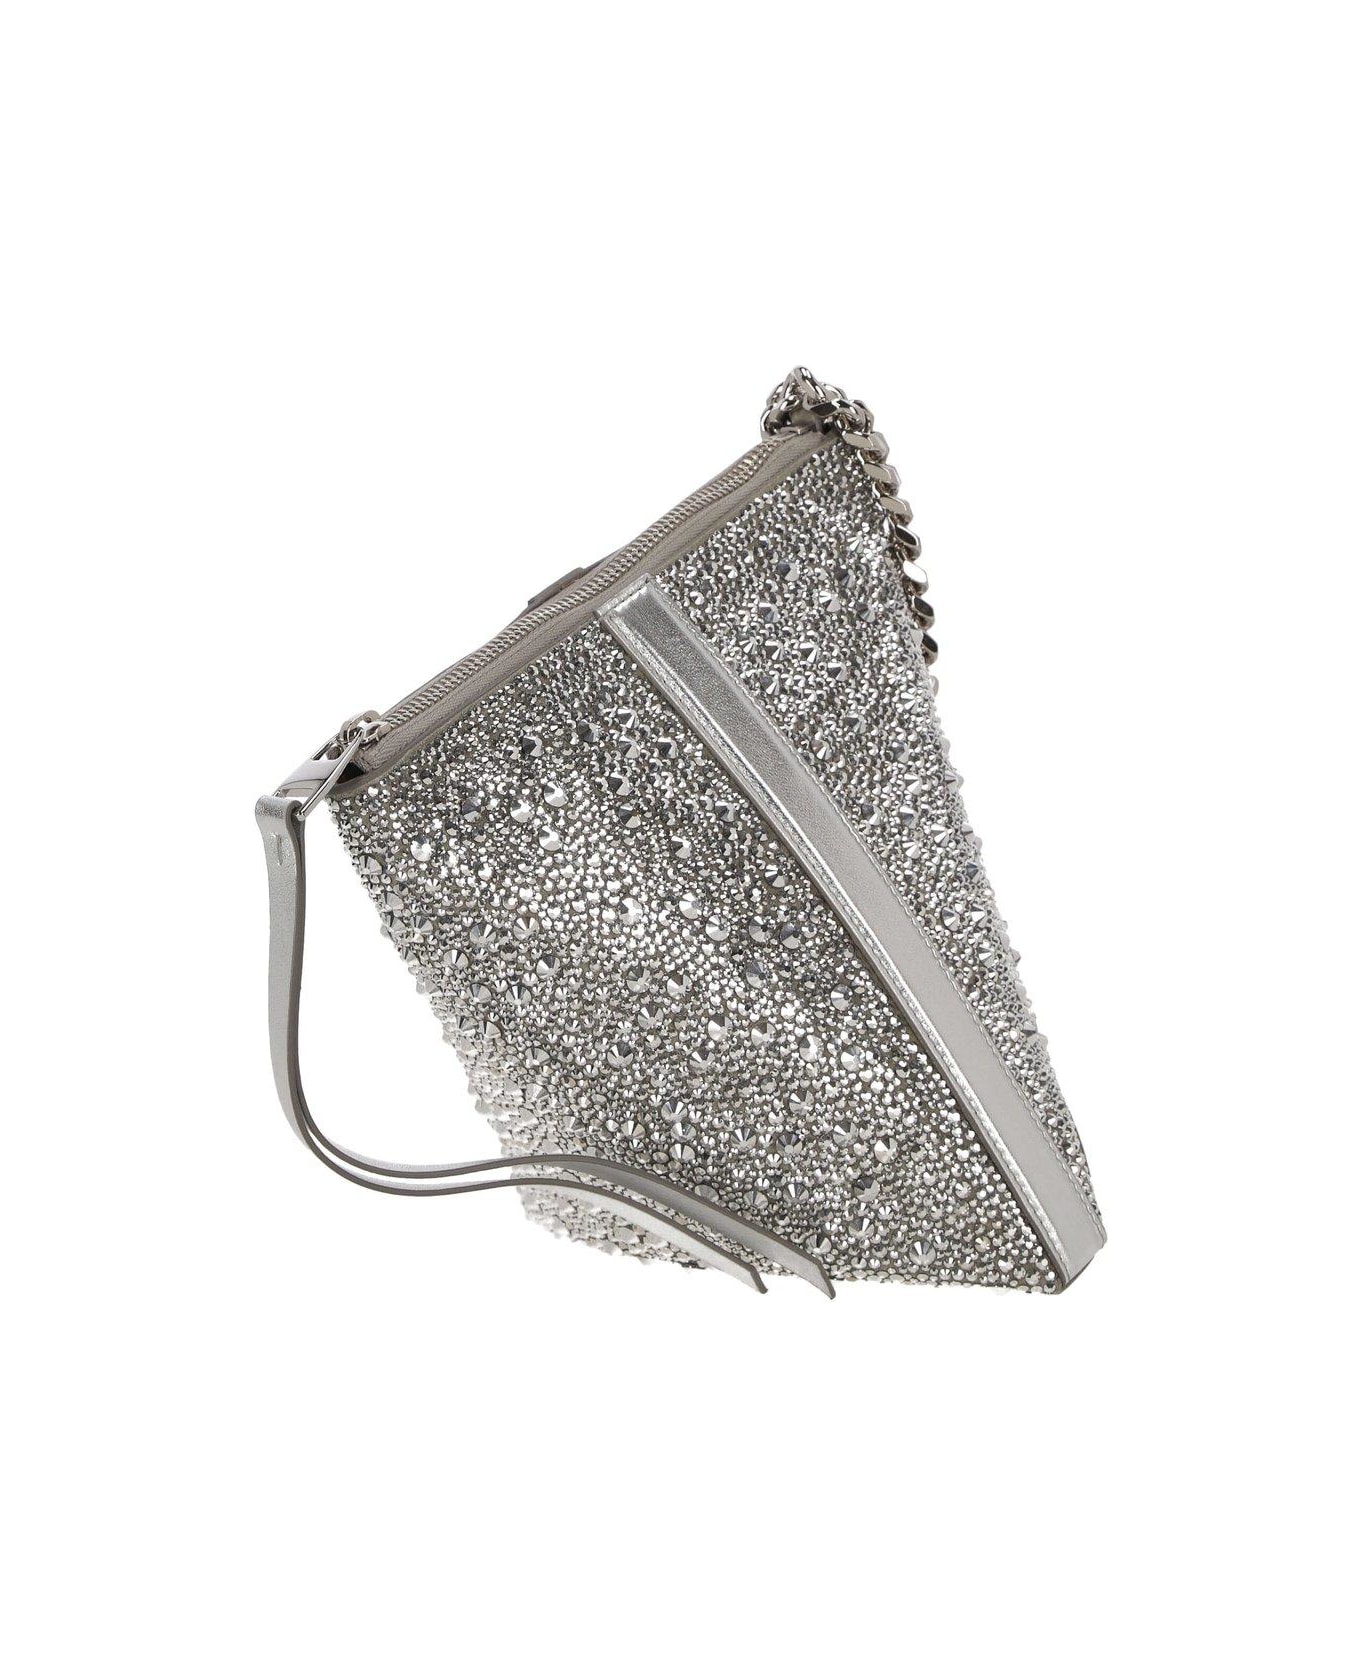 Alexander McQueen The Curve Embellished Pouch クラッチバッグ